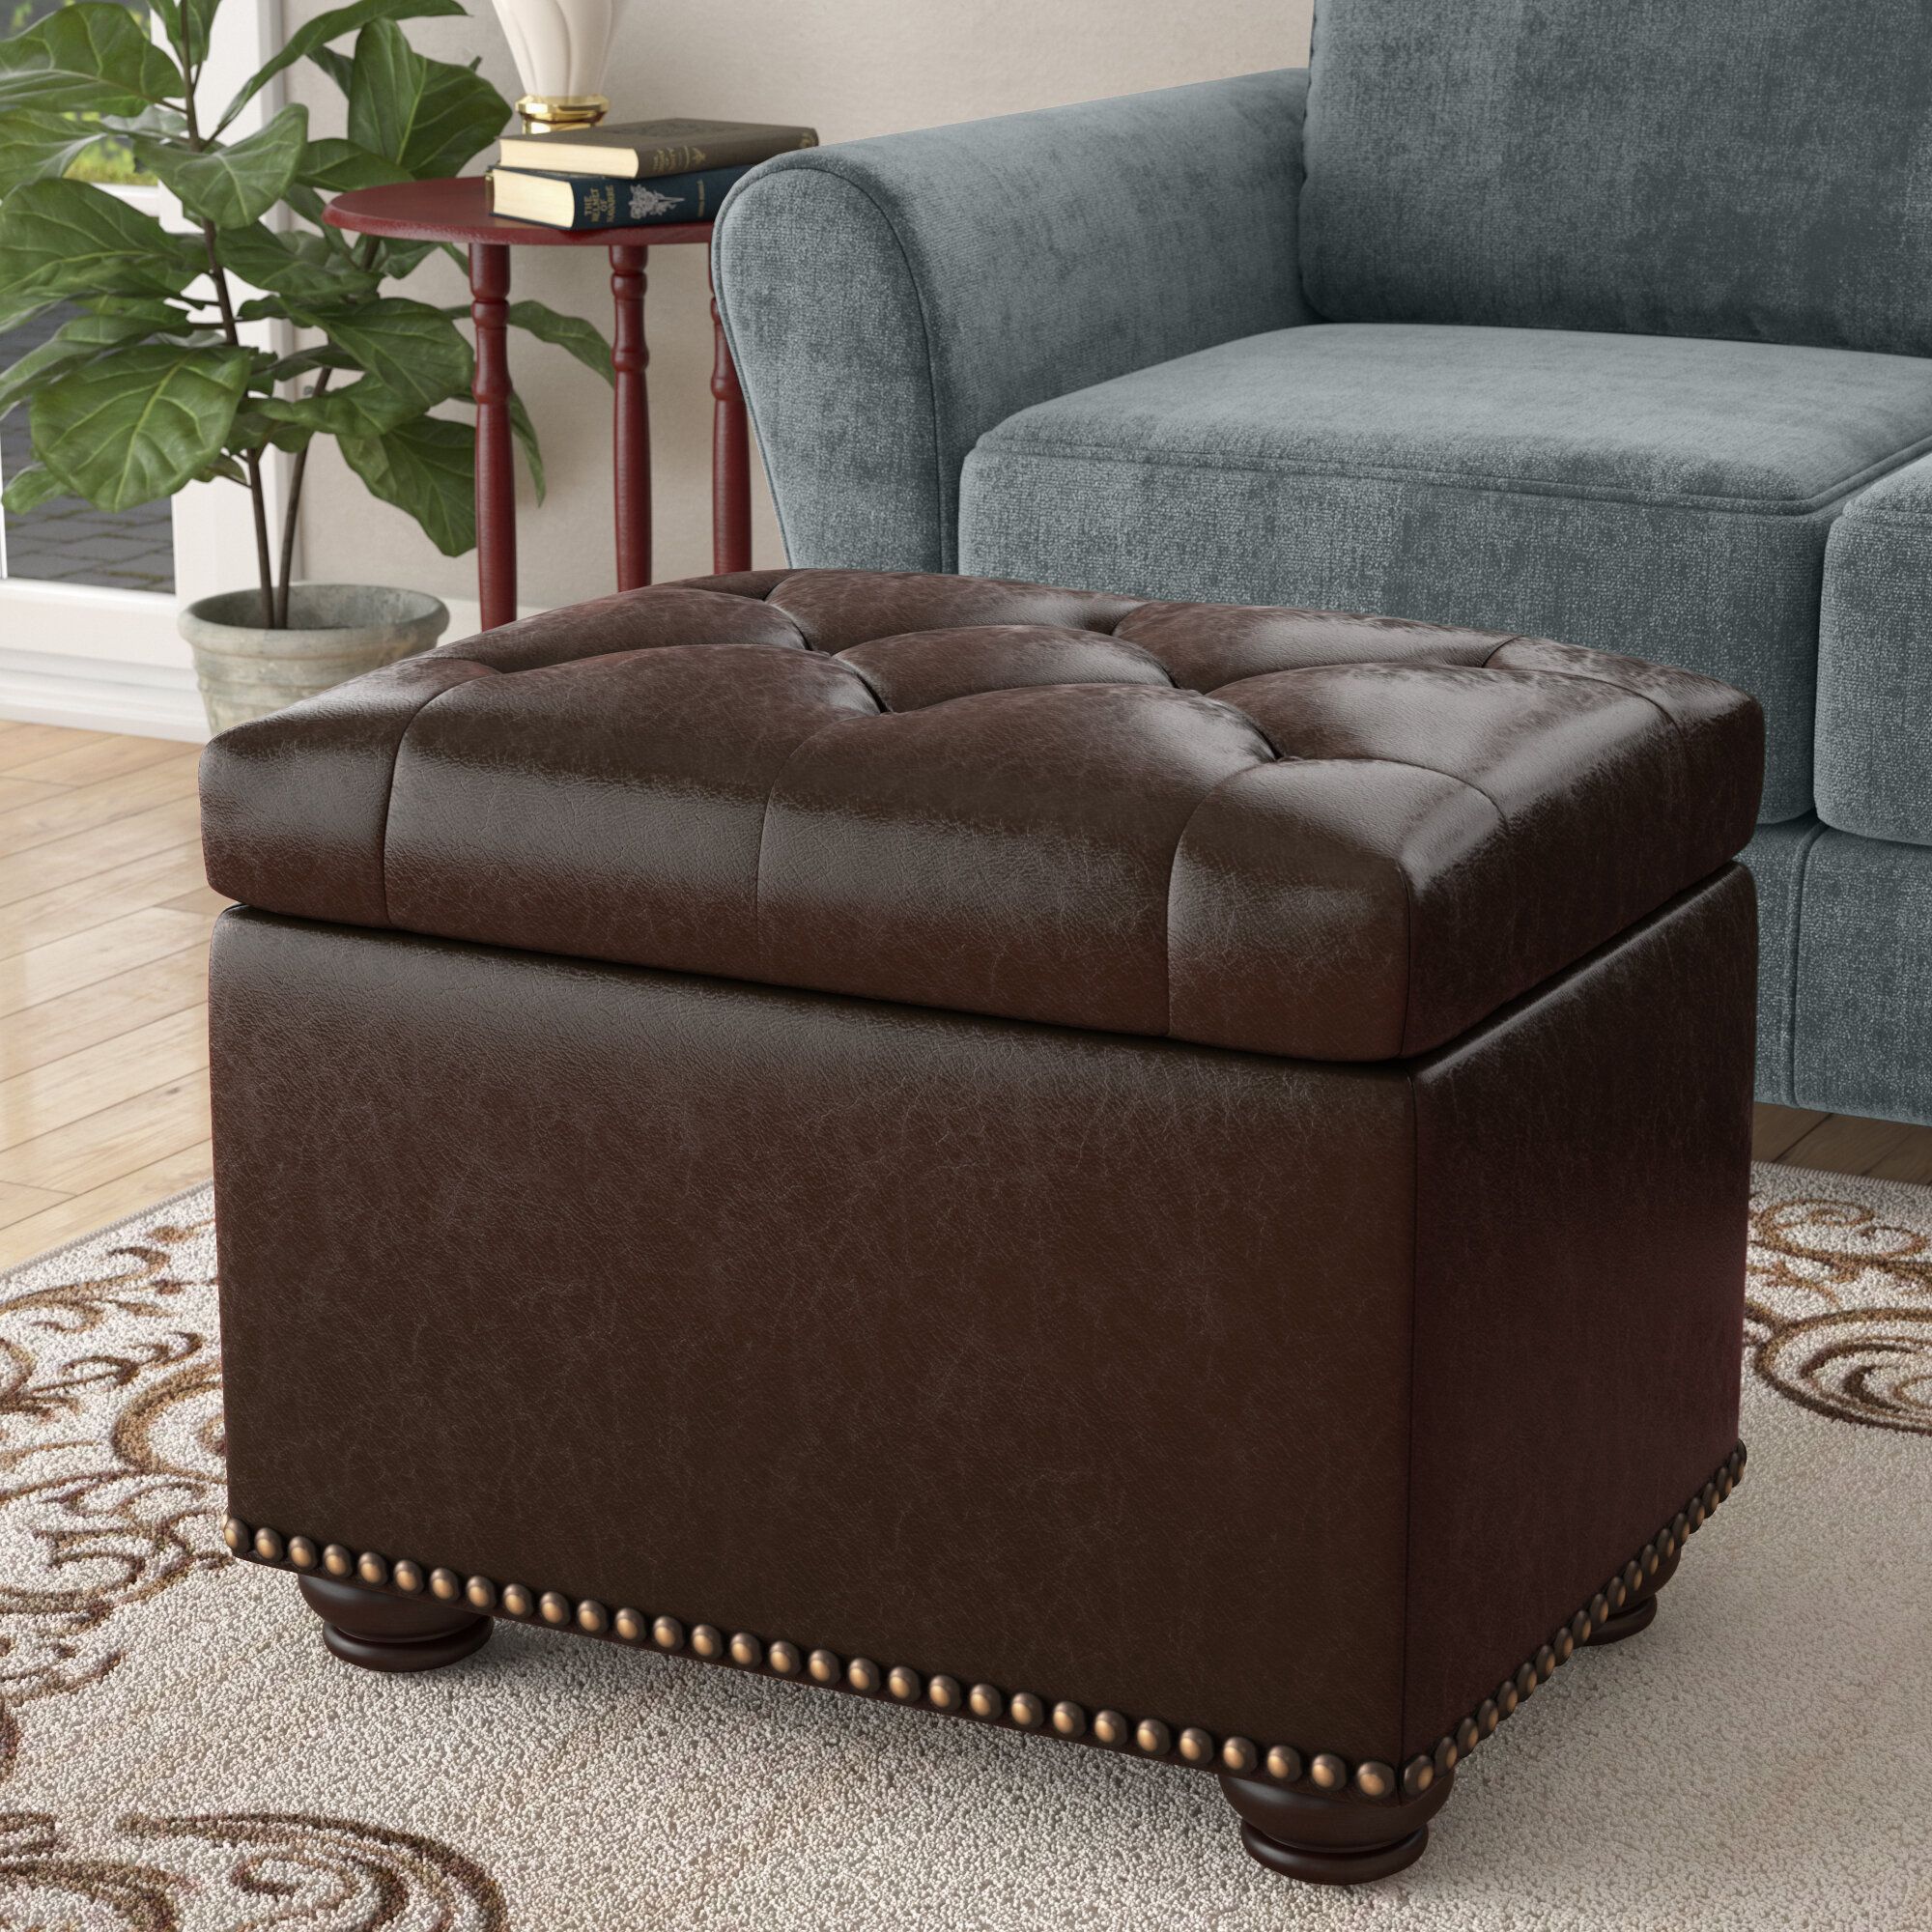 Boston Espresso Brown Tufted Leather Storage Ottoman Coffee Table Within Brown Leather Round Pouf Ottomans (View 8 of 20)